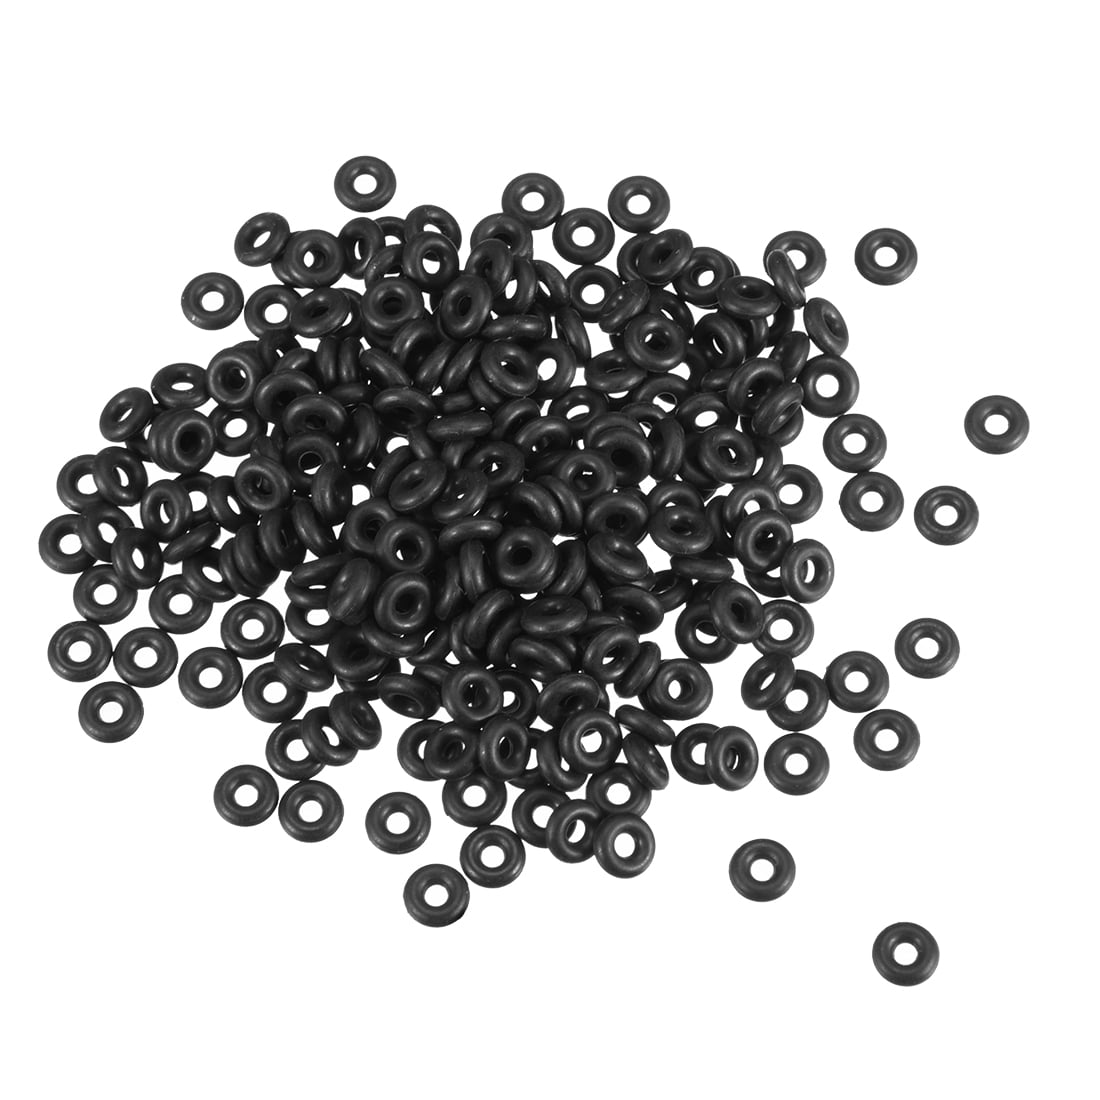 Silicone O-rings 15 x 2mm Price for 10 pcs 